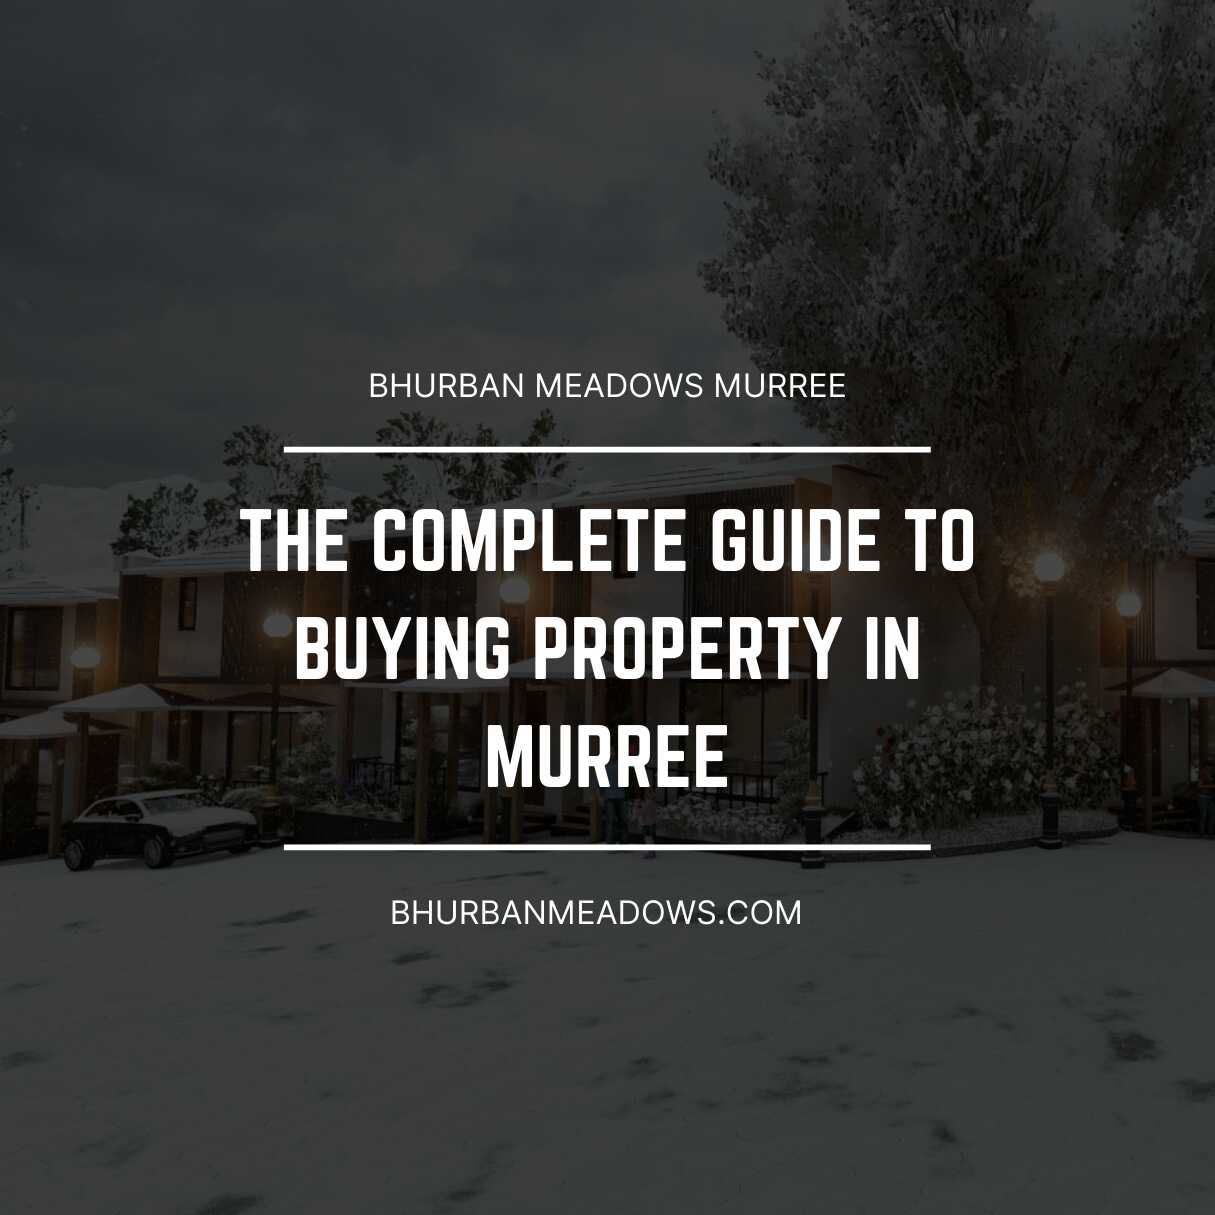 THE COMPLETE GUIDE TO BUYING PROPERTY IN Murree.